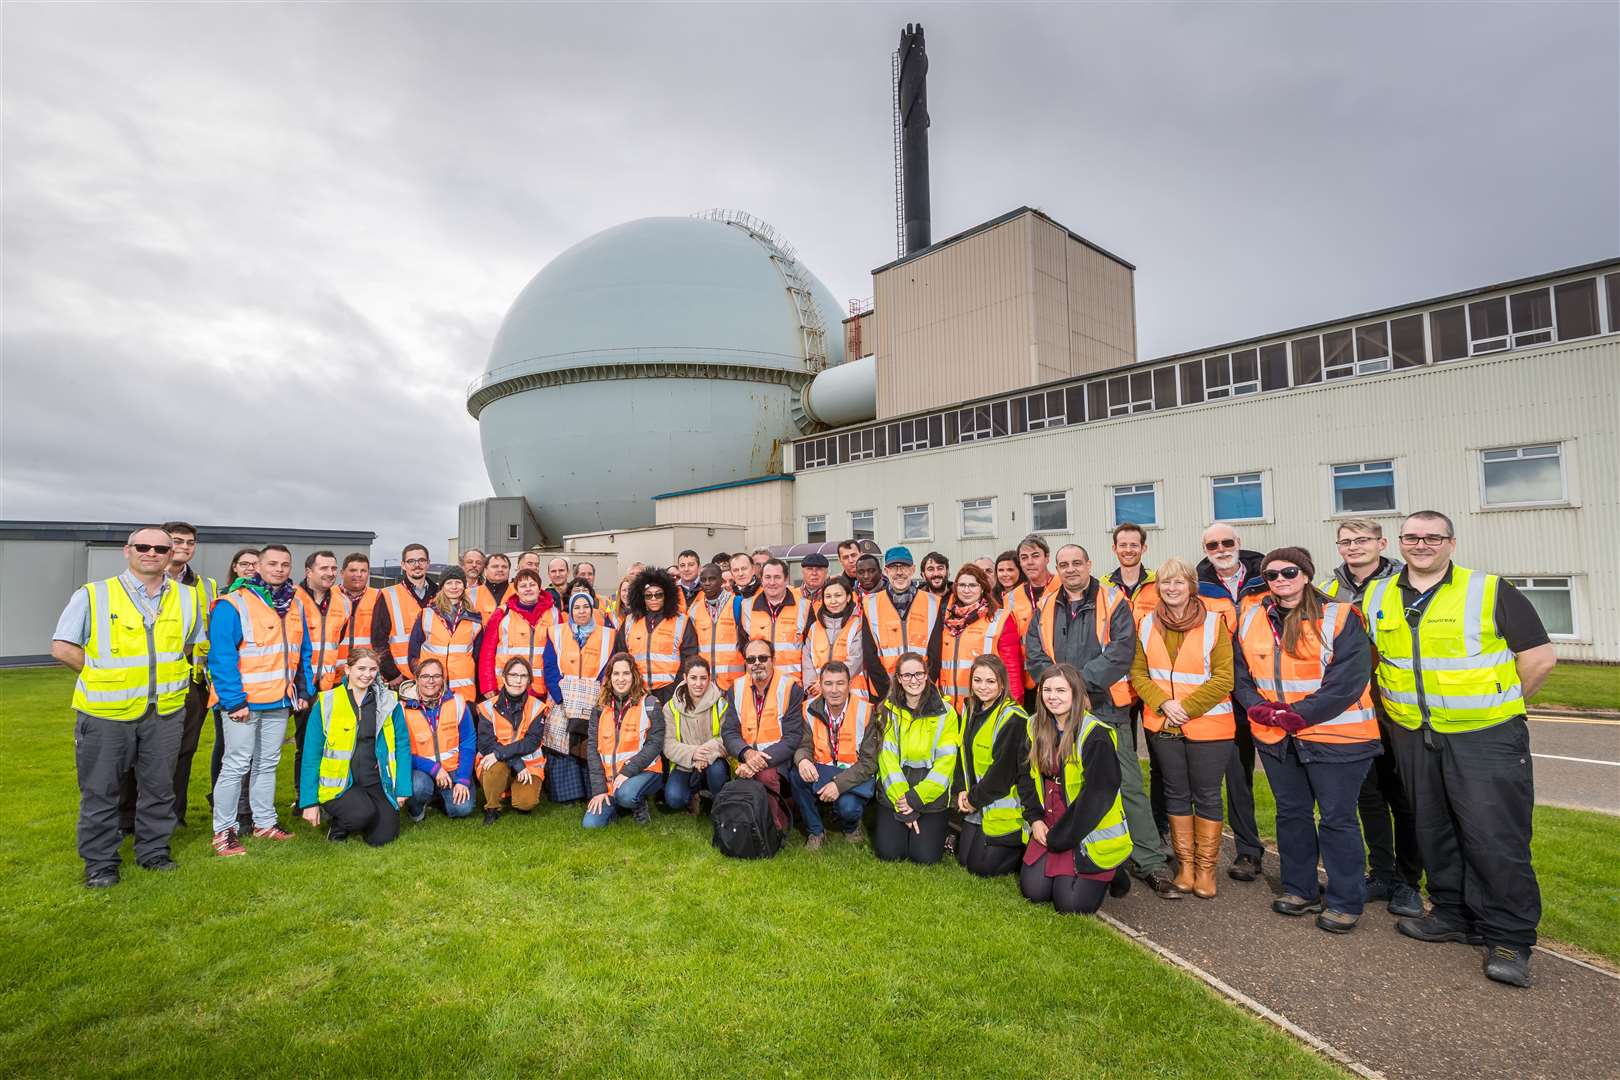 More than 50 specialists attended the International Atomic Energy Agency meeting at the Dounreay site.